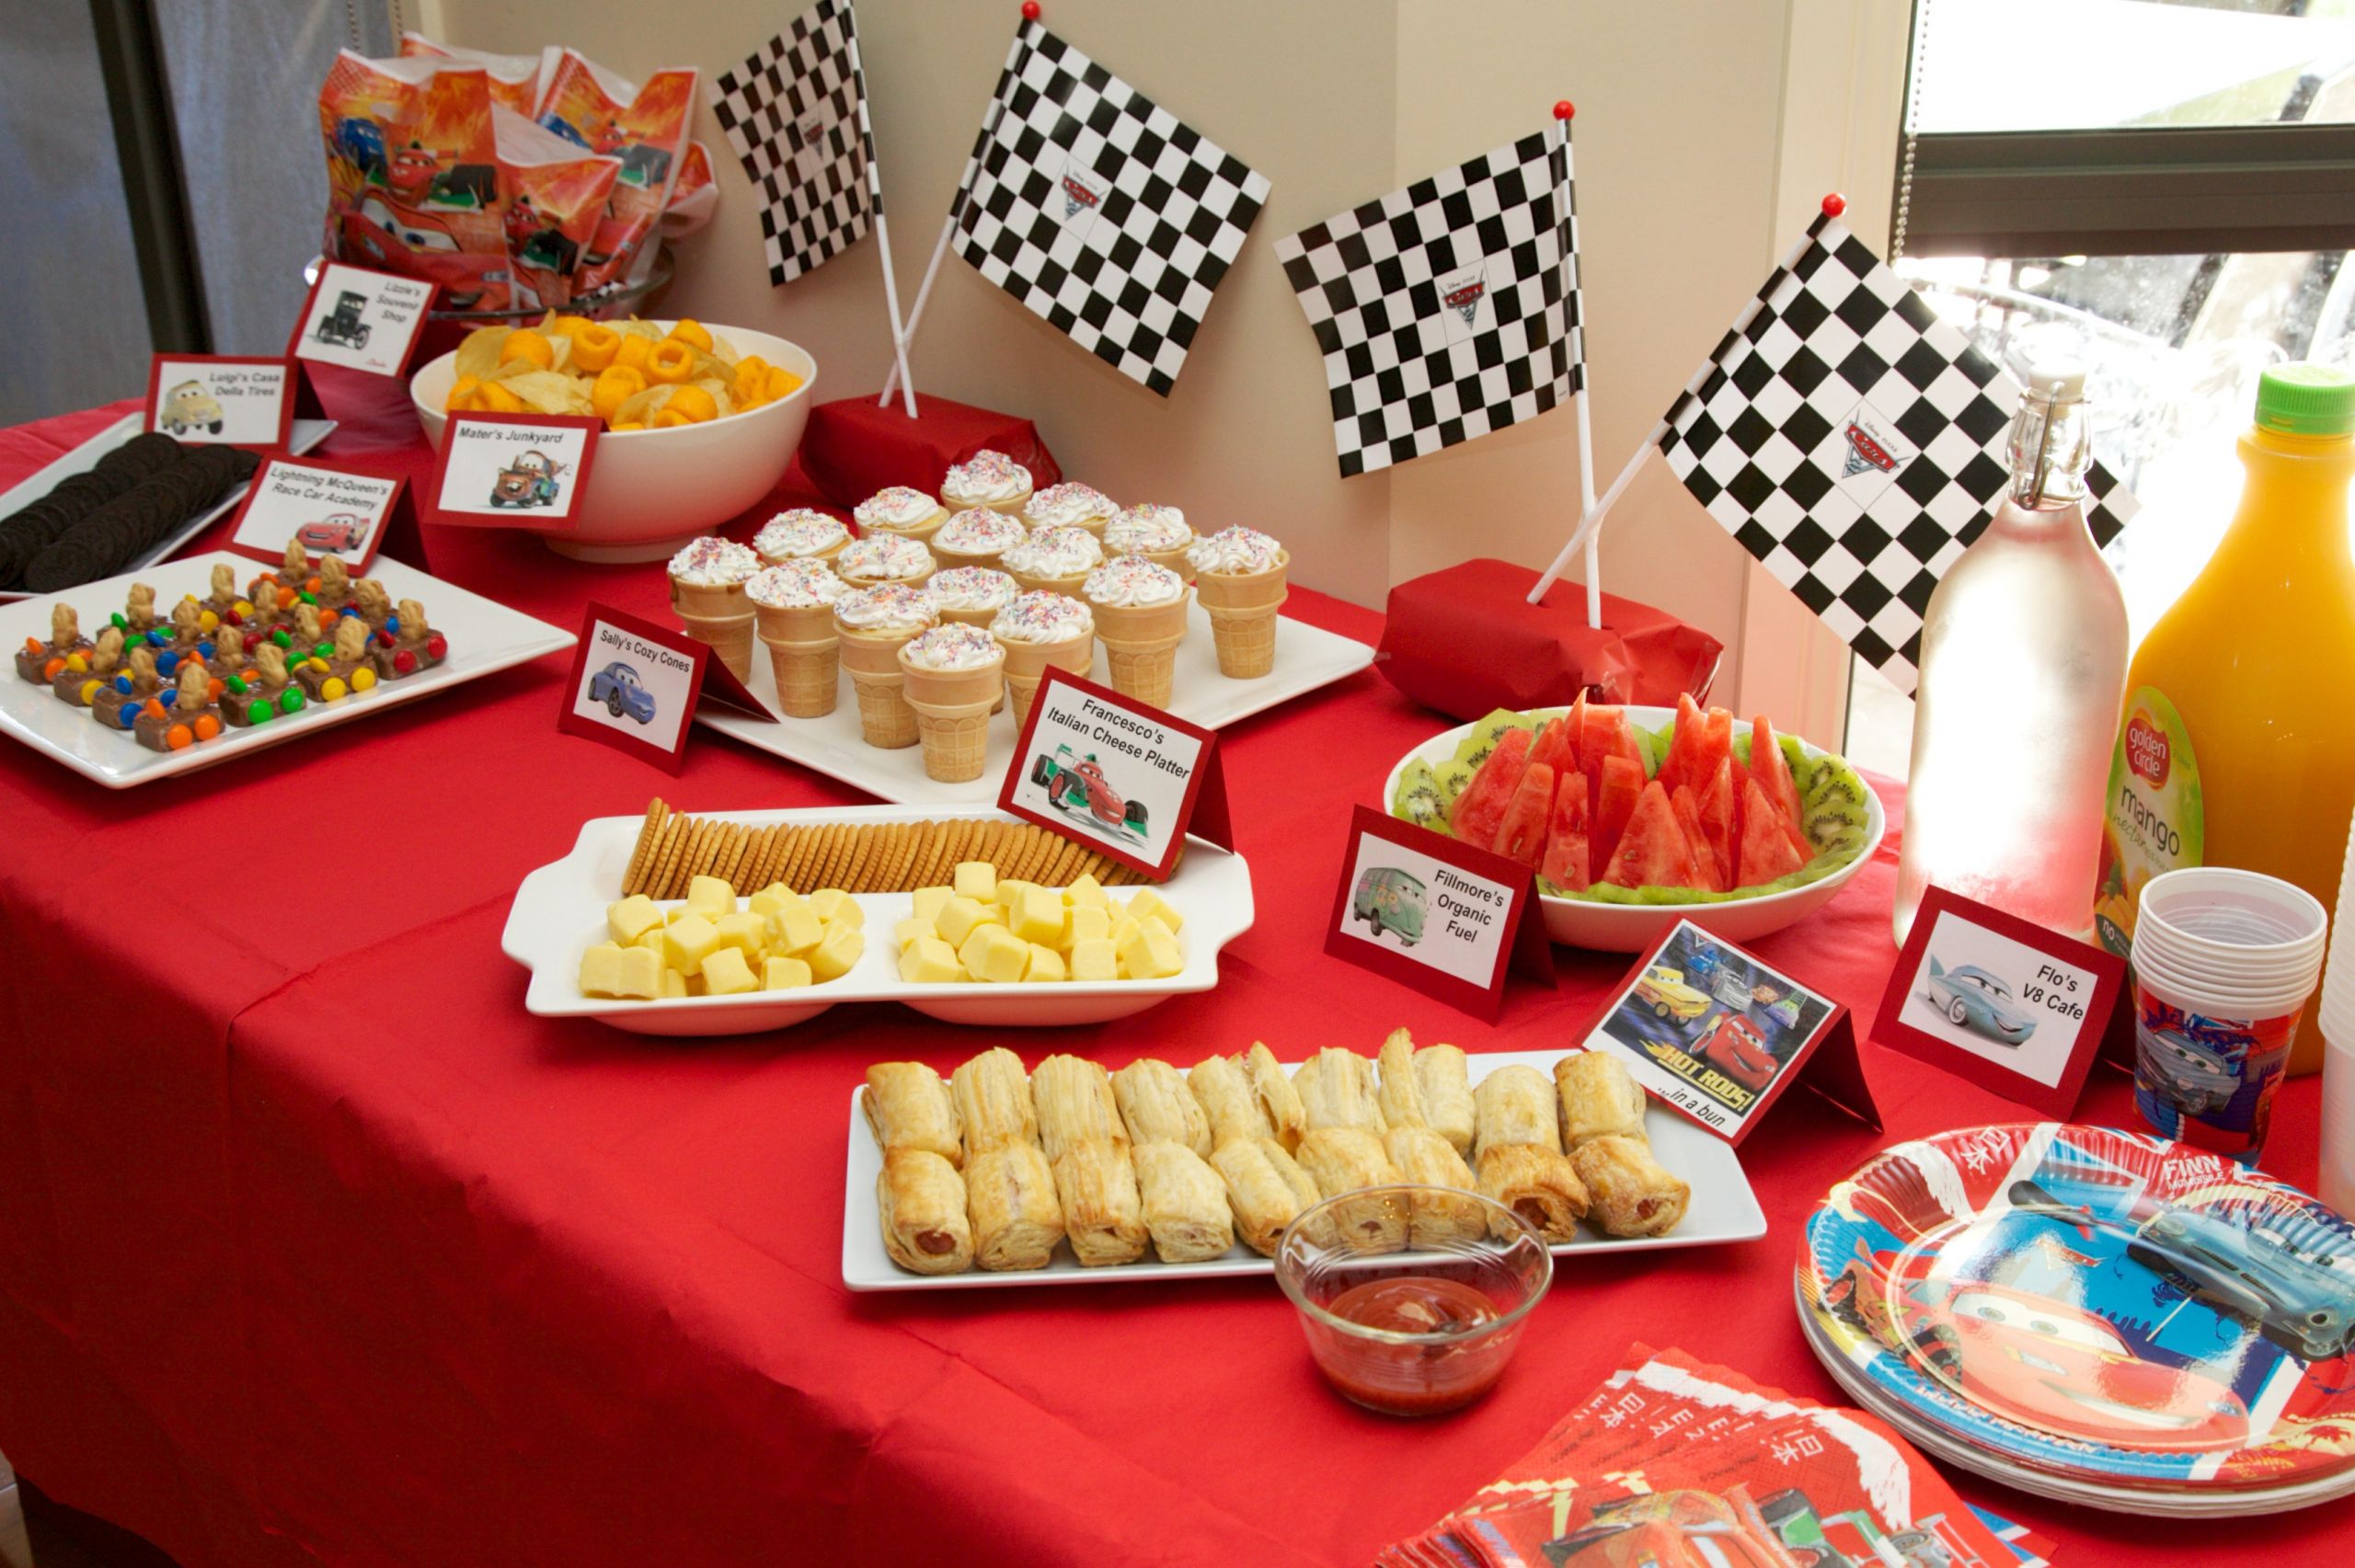 Cheap Food Ideas For Birthday Party
 How to throw a BIG kids birthday party on a small bud